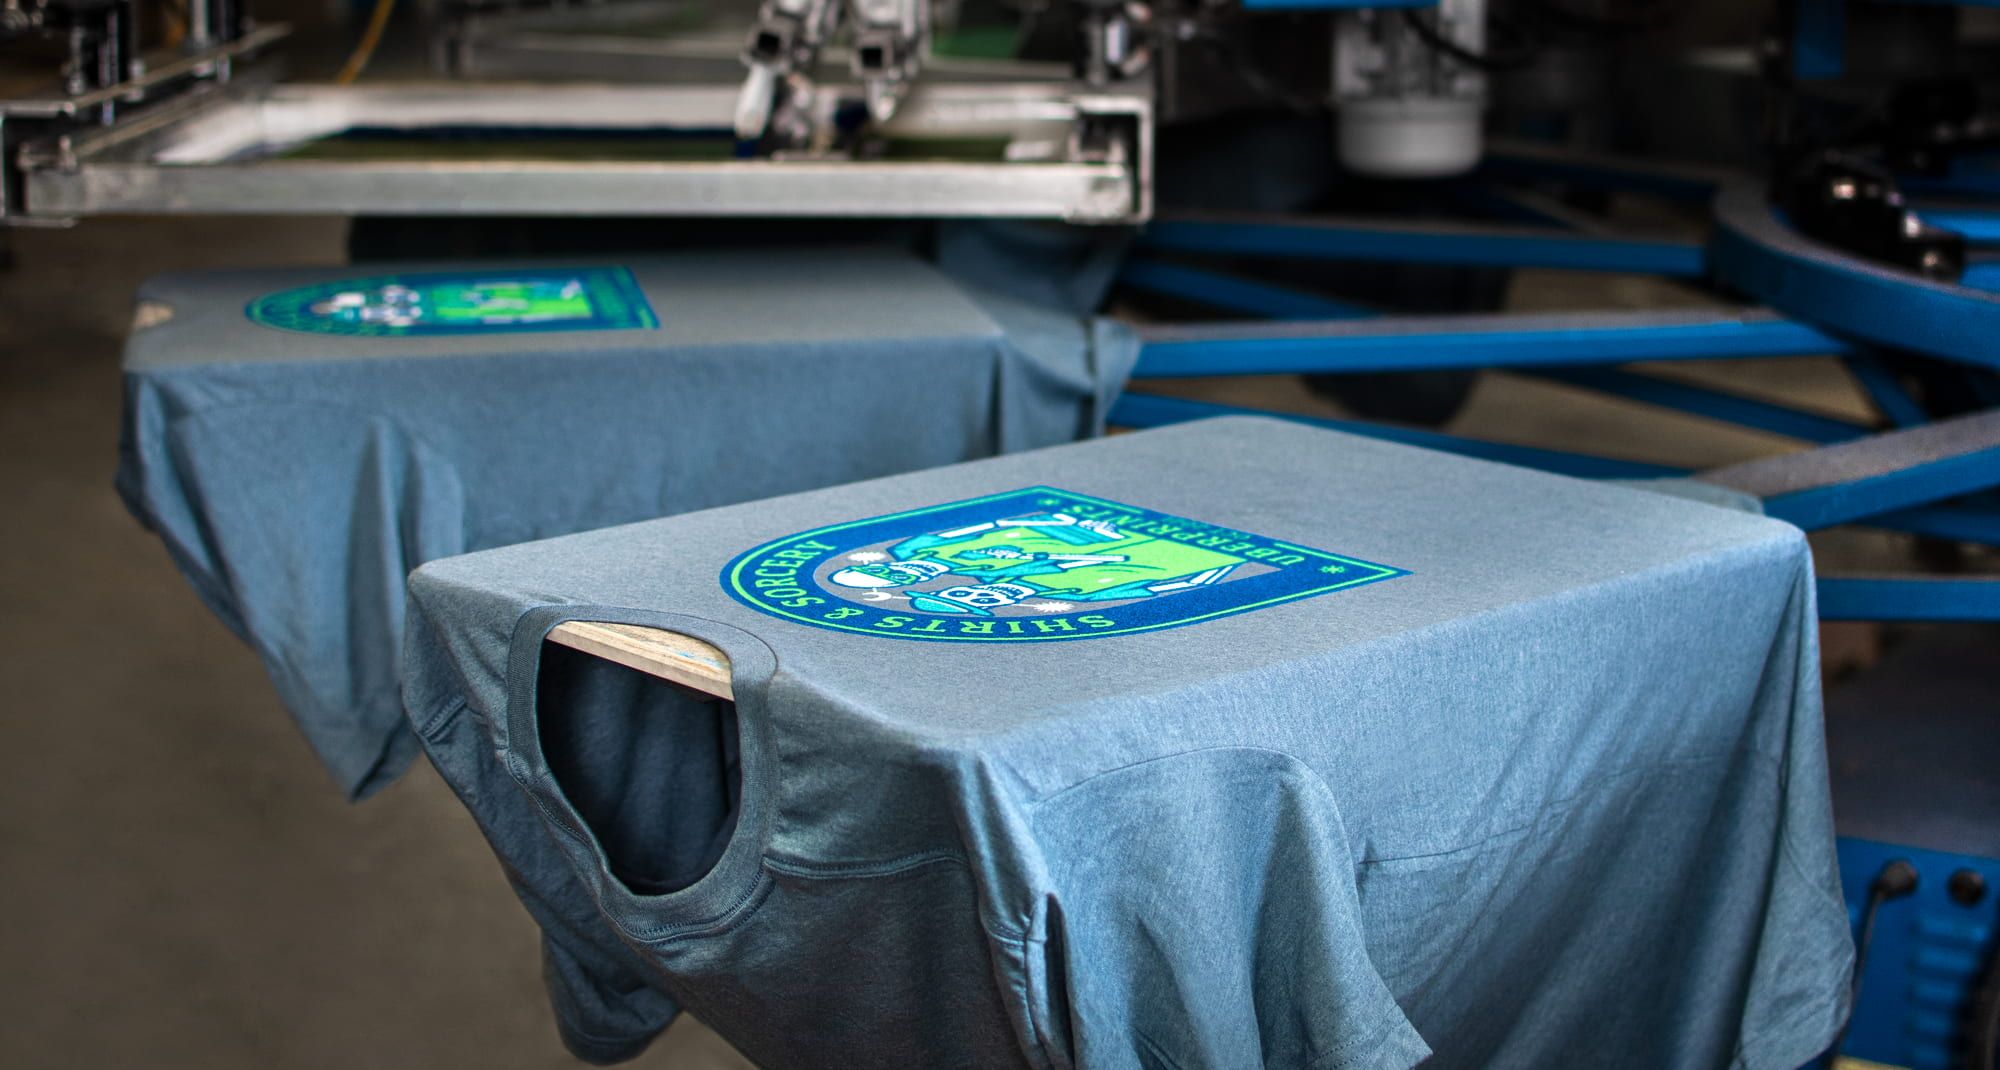 Something to scream about: Printing our Halloween holiday shirt